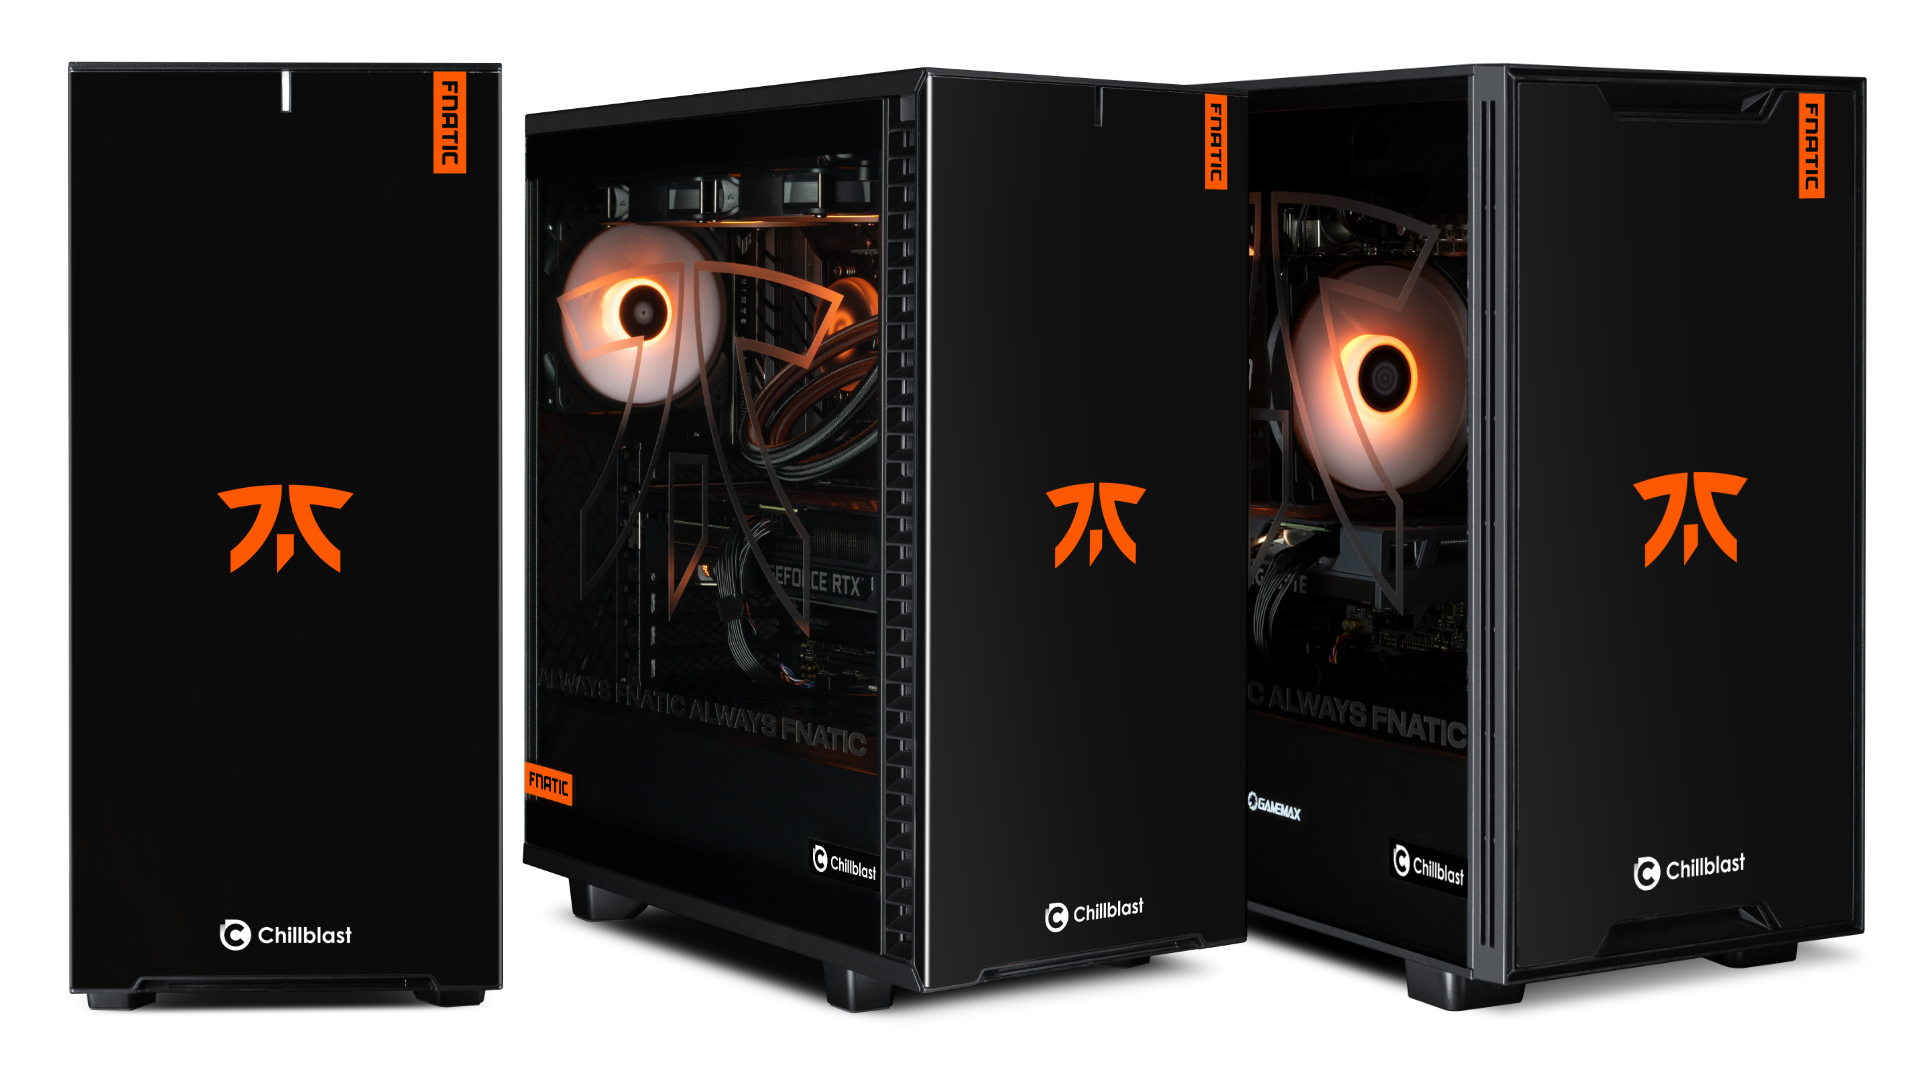 New Chillblast x Fnatic gaming PC rigs launch today